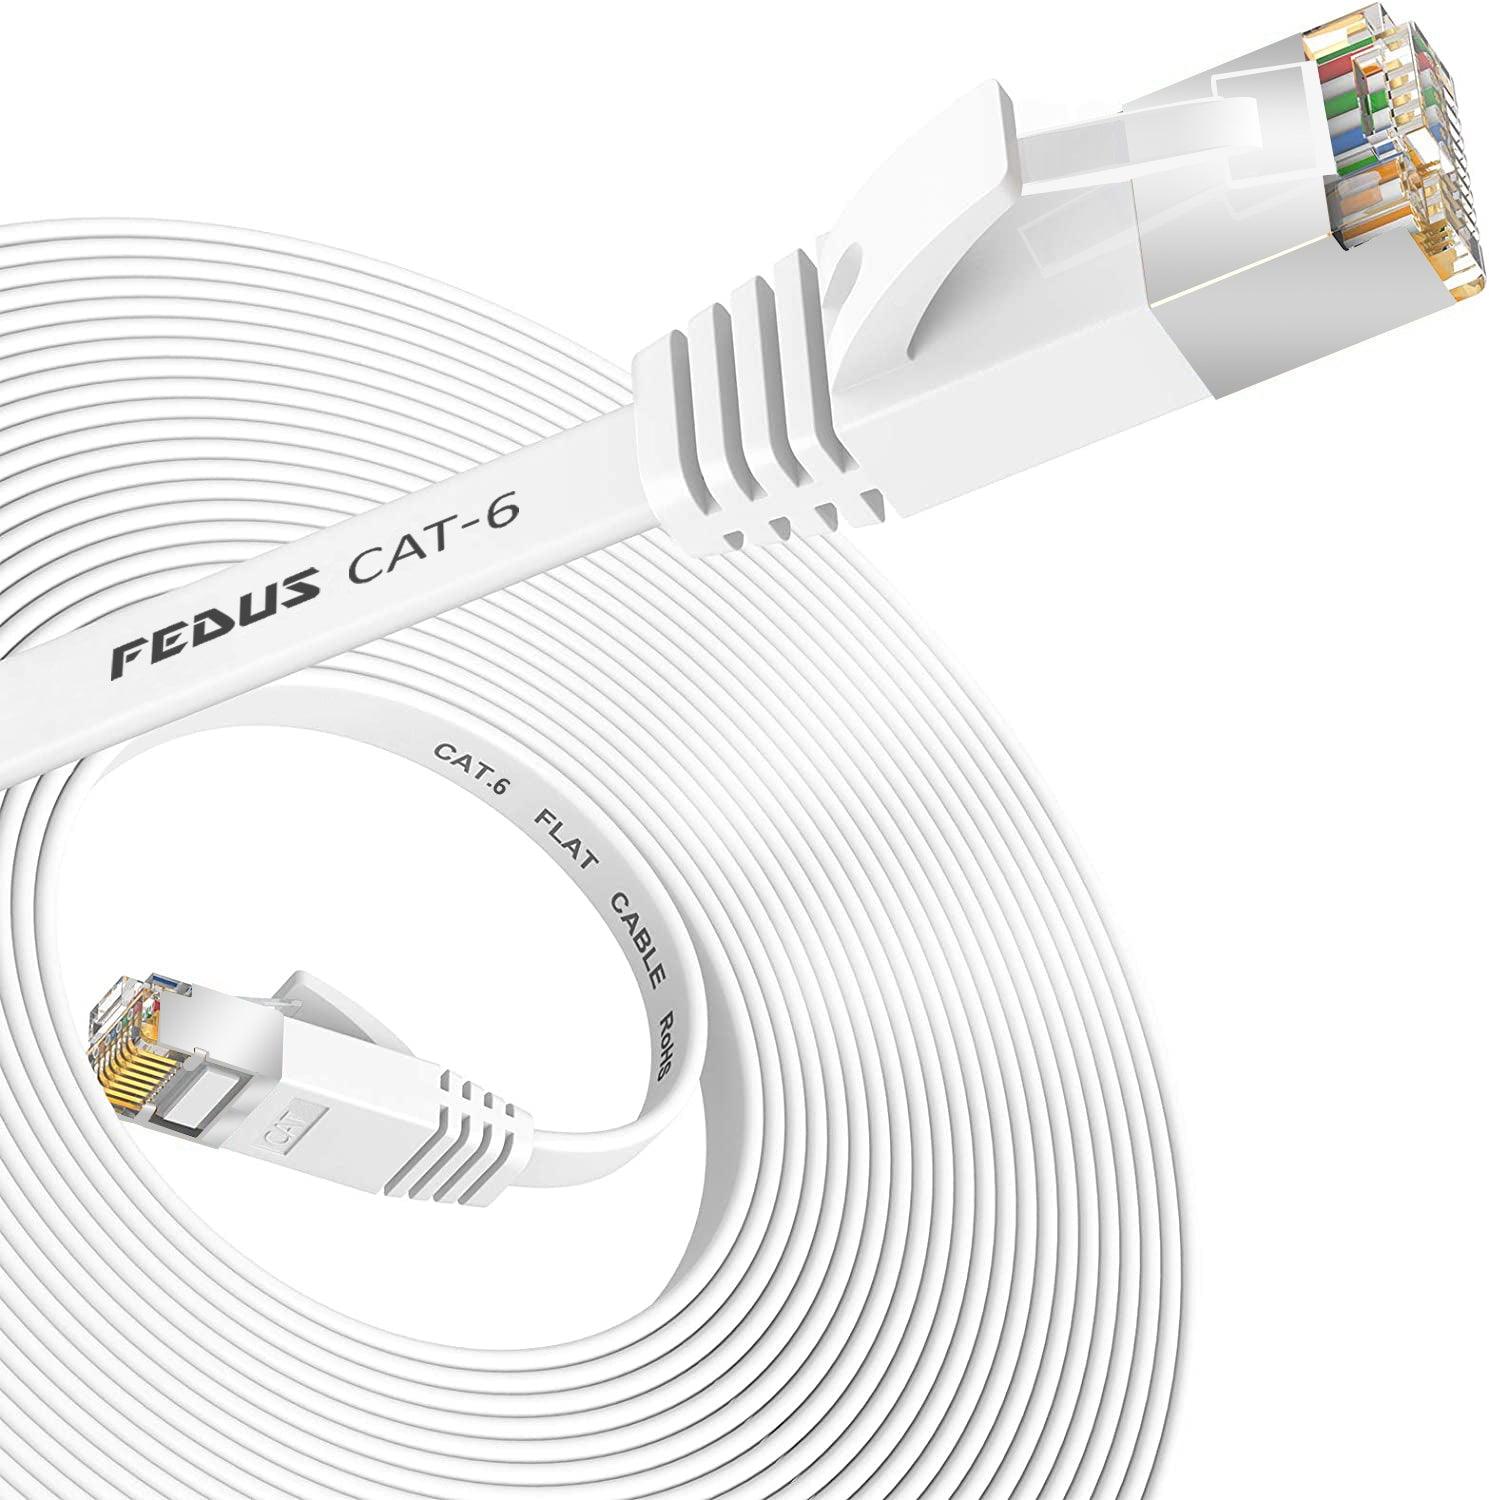 FEDUS 15 Meter Cat6 Ethernet Cable , Lan Cable, Patch Cord Network